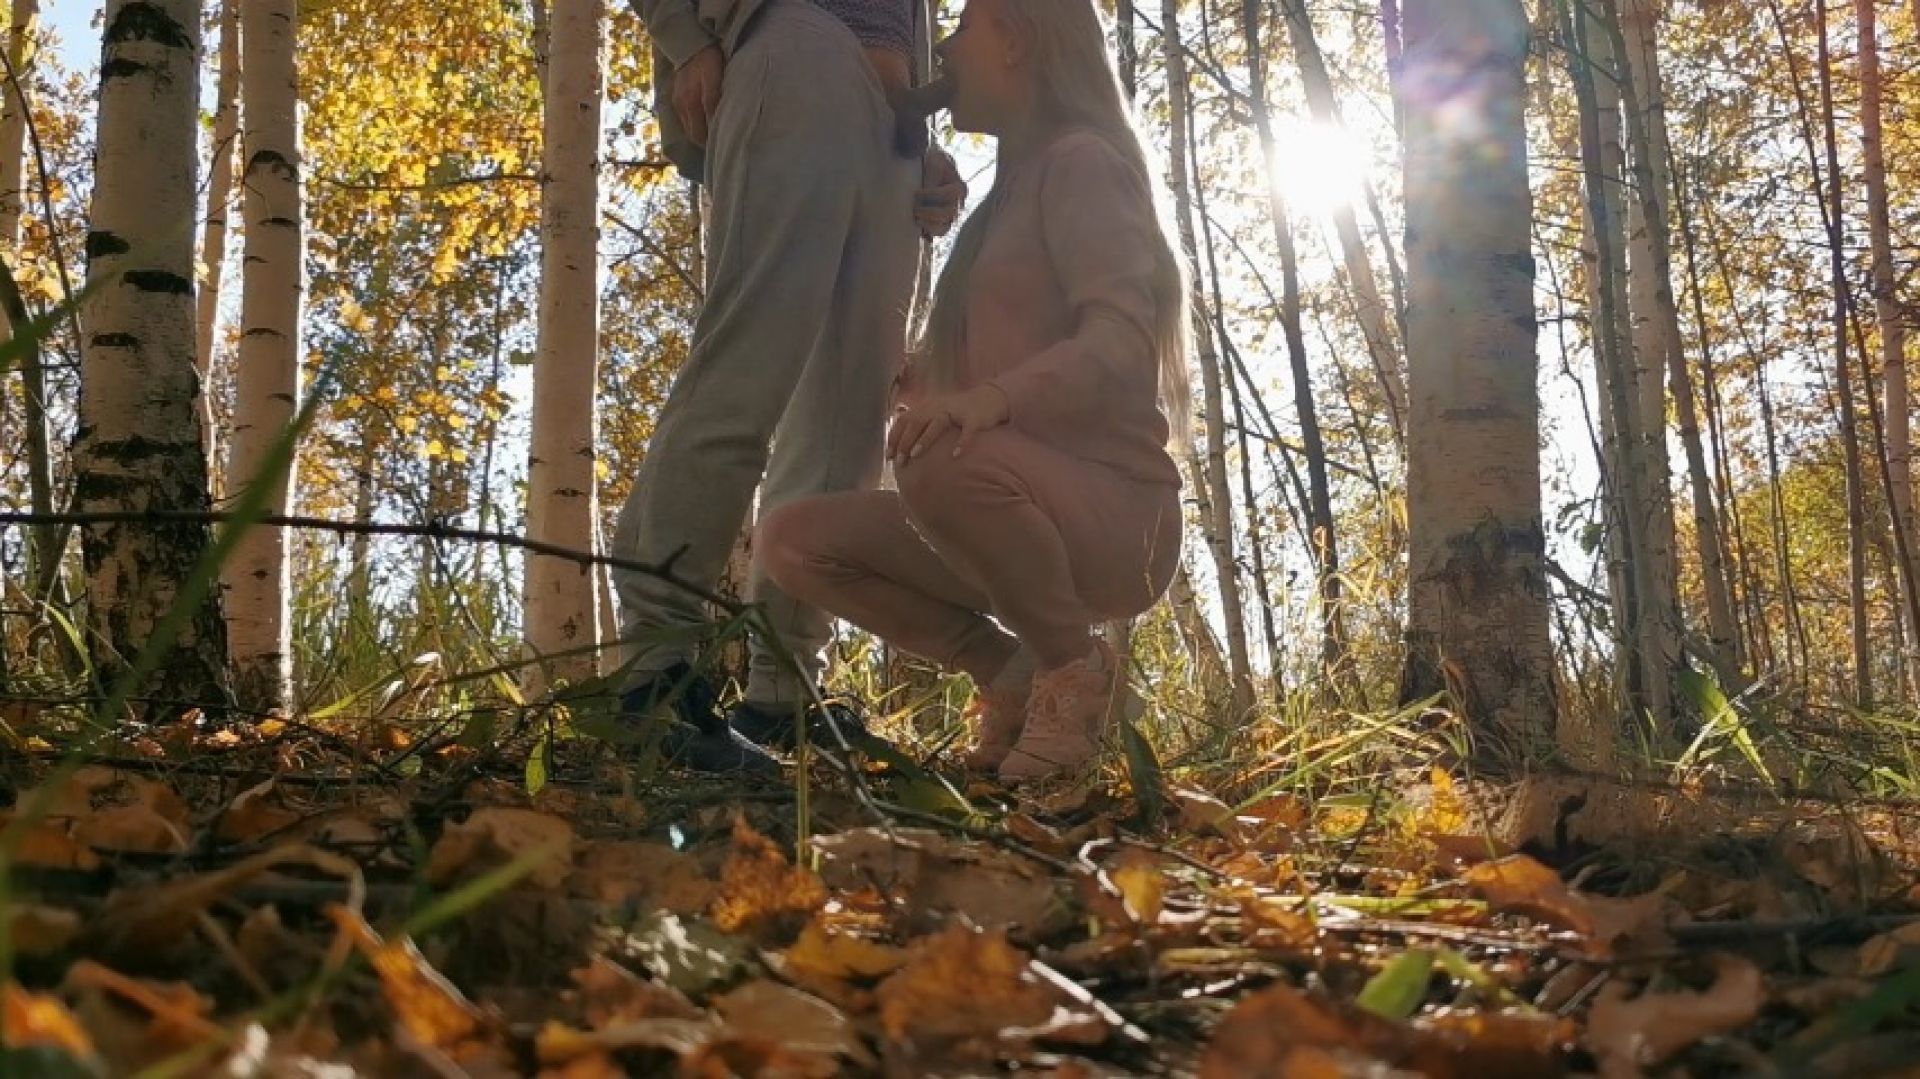 Stranger cum in my mouth in the woods